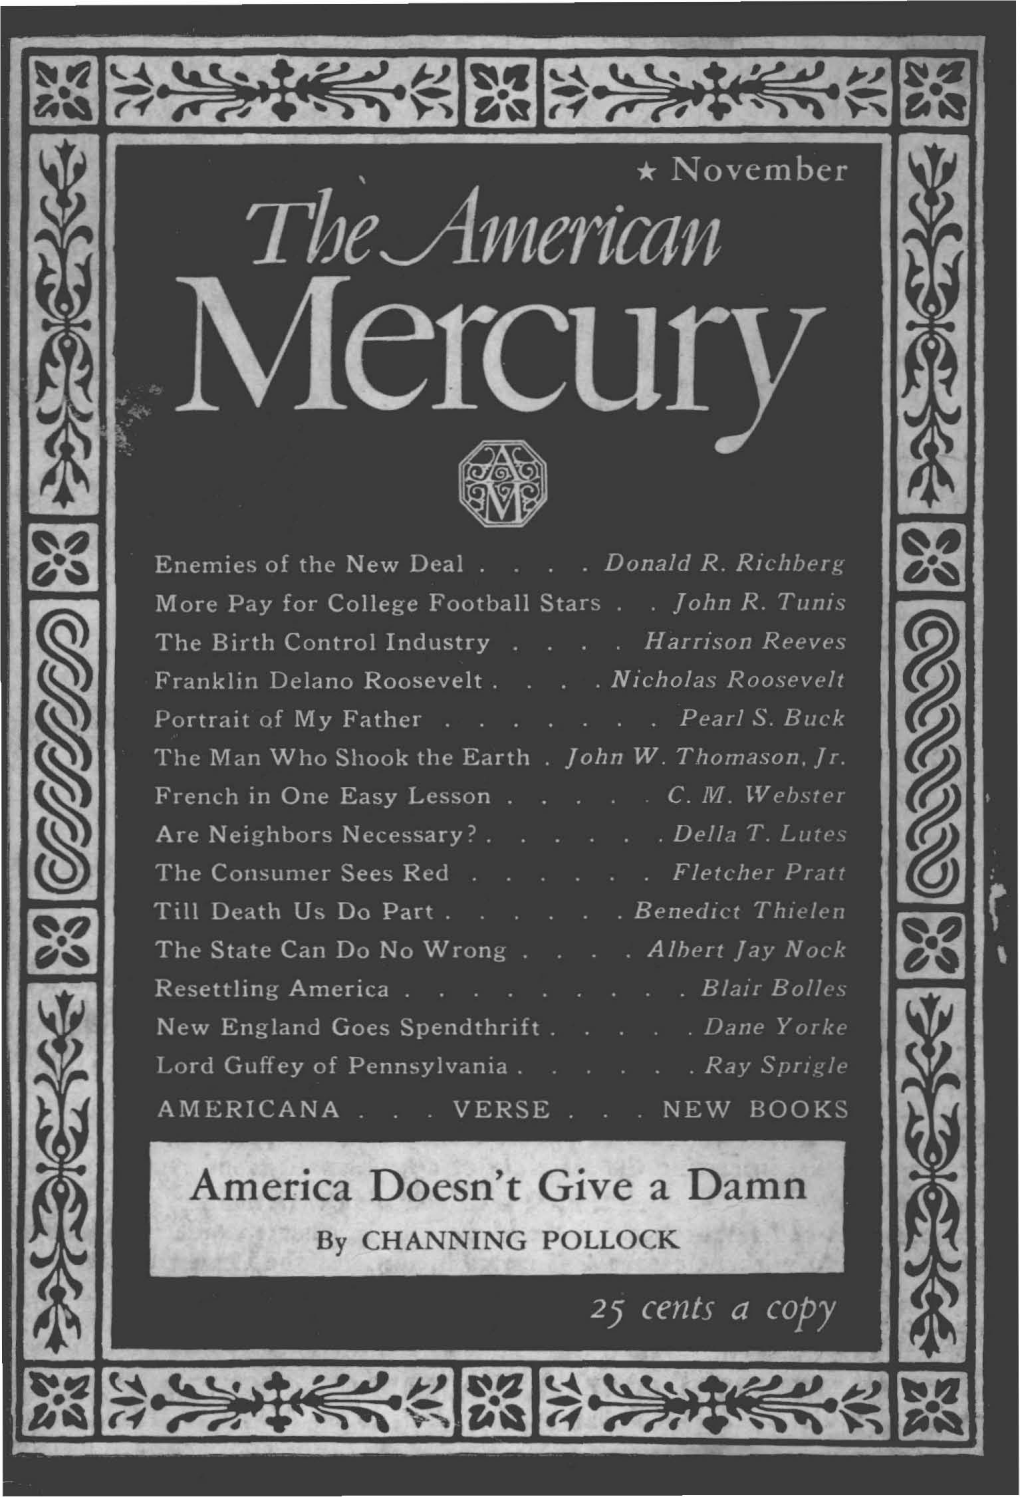 THE AMERICAN MERCURY ~~~~.~~~~.~~~~+~~~~+~~~~+~~~~~~~~+~~~~ ~ ~ ~ V~I~I1ce TABLE of CONTENTS N~~ER ~